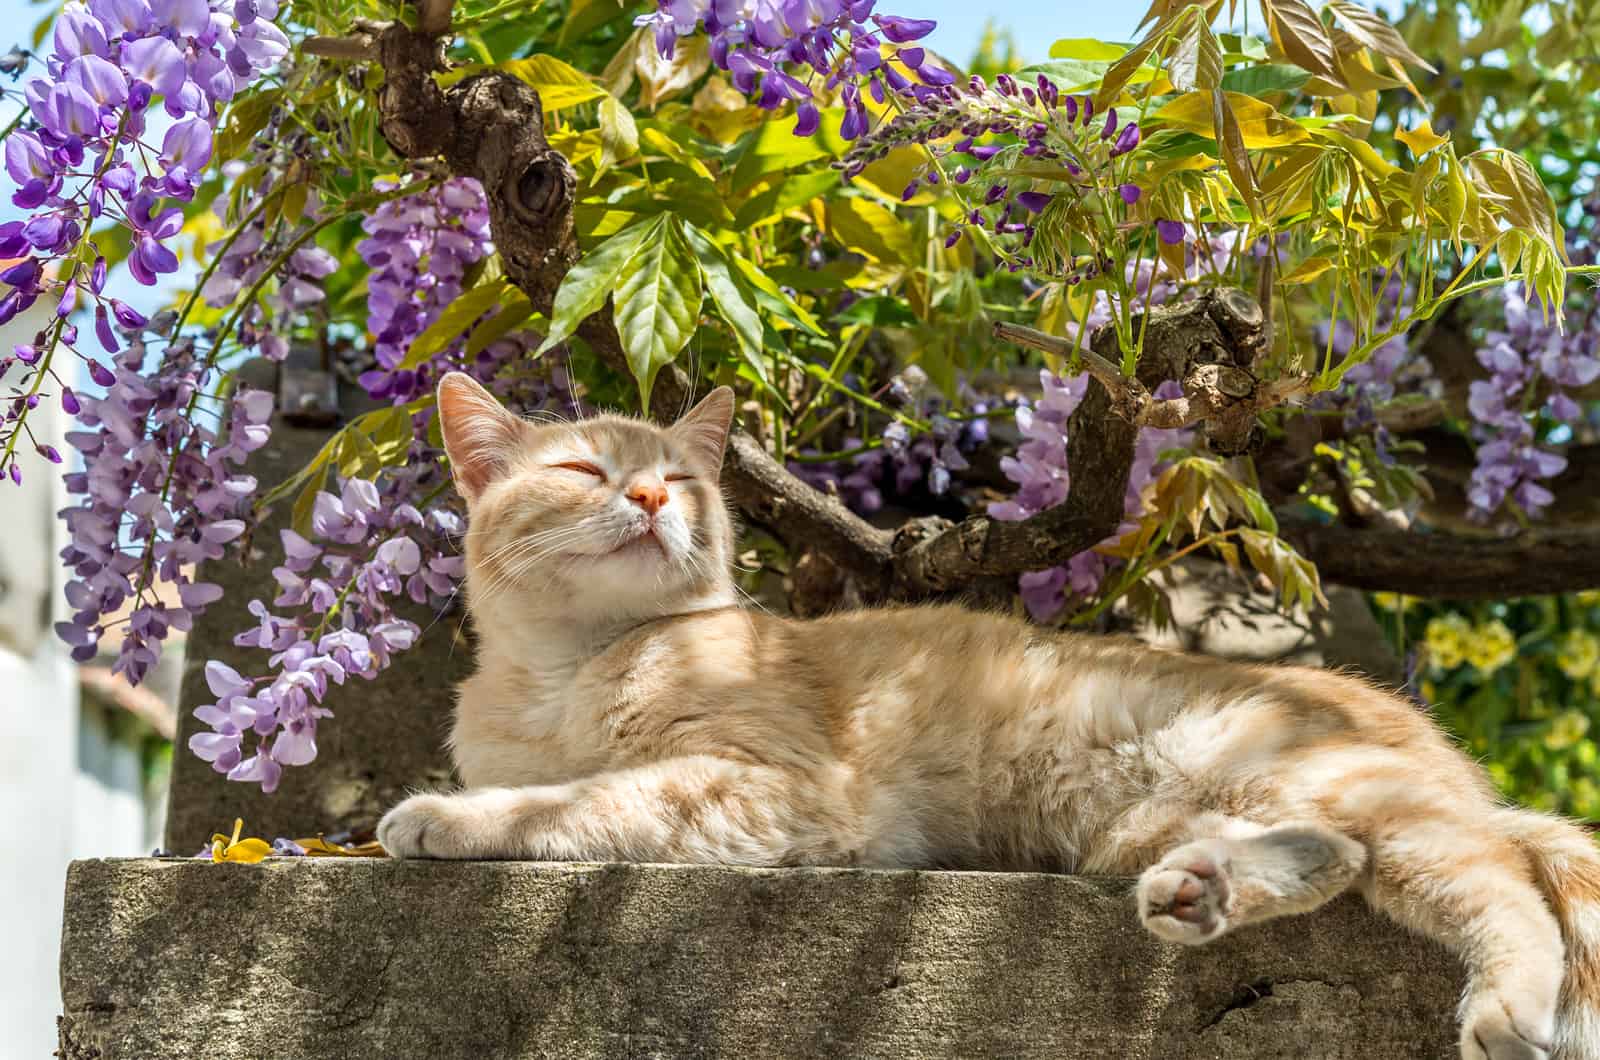 the cat lies down and enjoys the garden